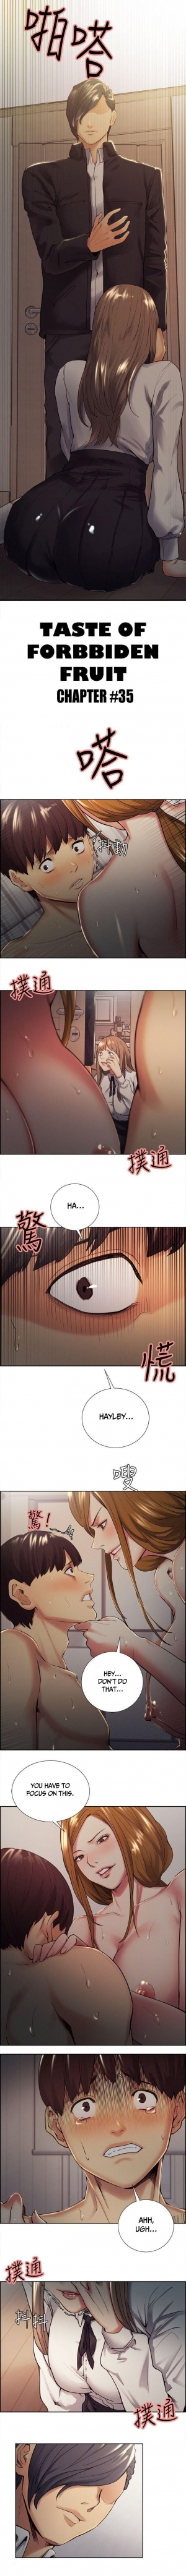 [Serious] Taste of Forbbiden Fruit Ch.36/53 [English] [Hentai Universe] - Page 609